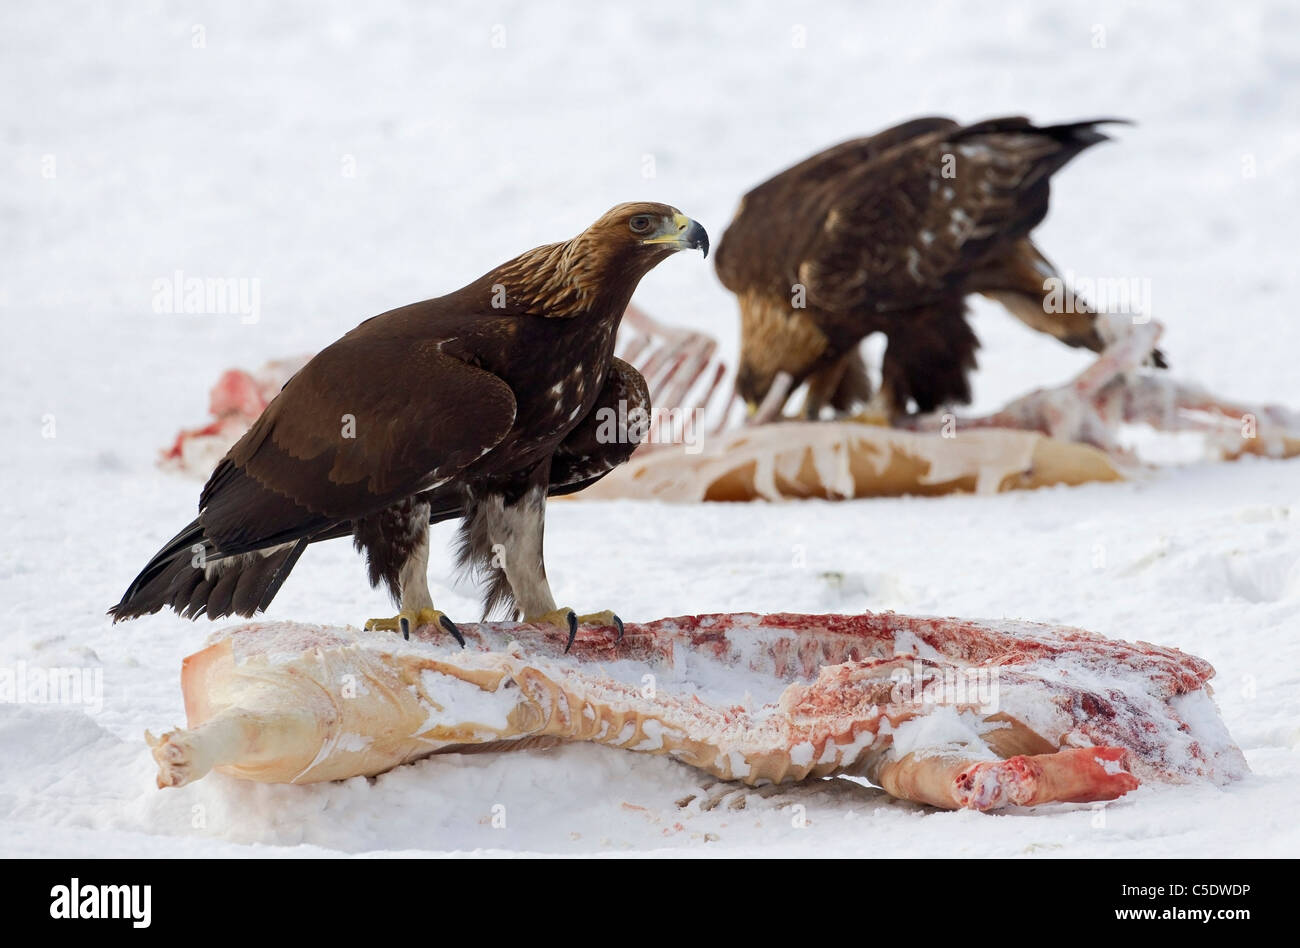 Golden eagles on carrions in winter landscape Stock Photo